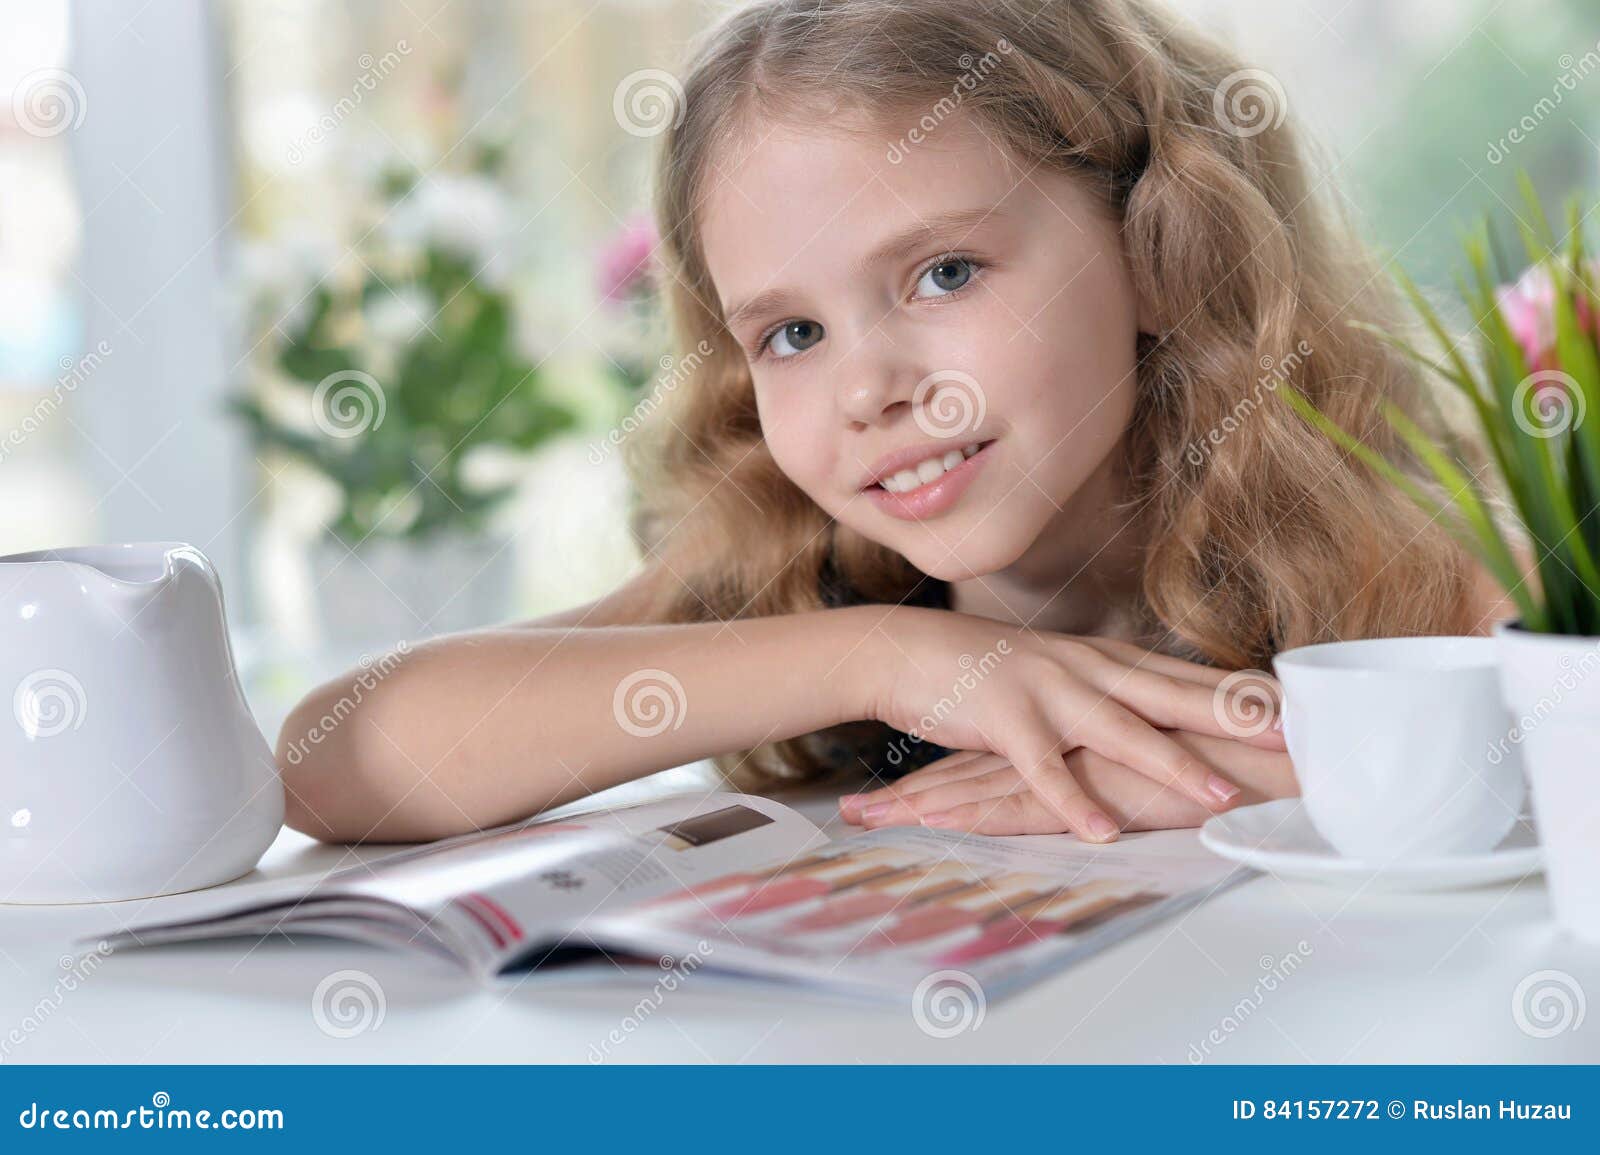 Portrait of a little girl reading and drinking tea